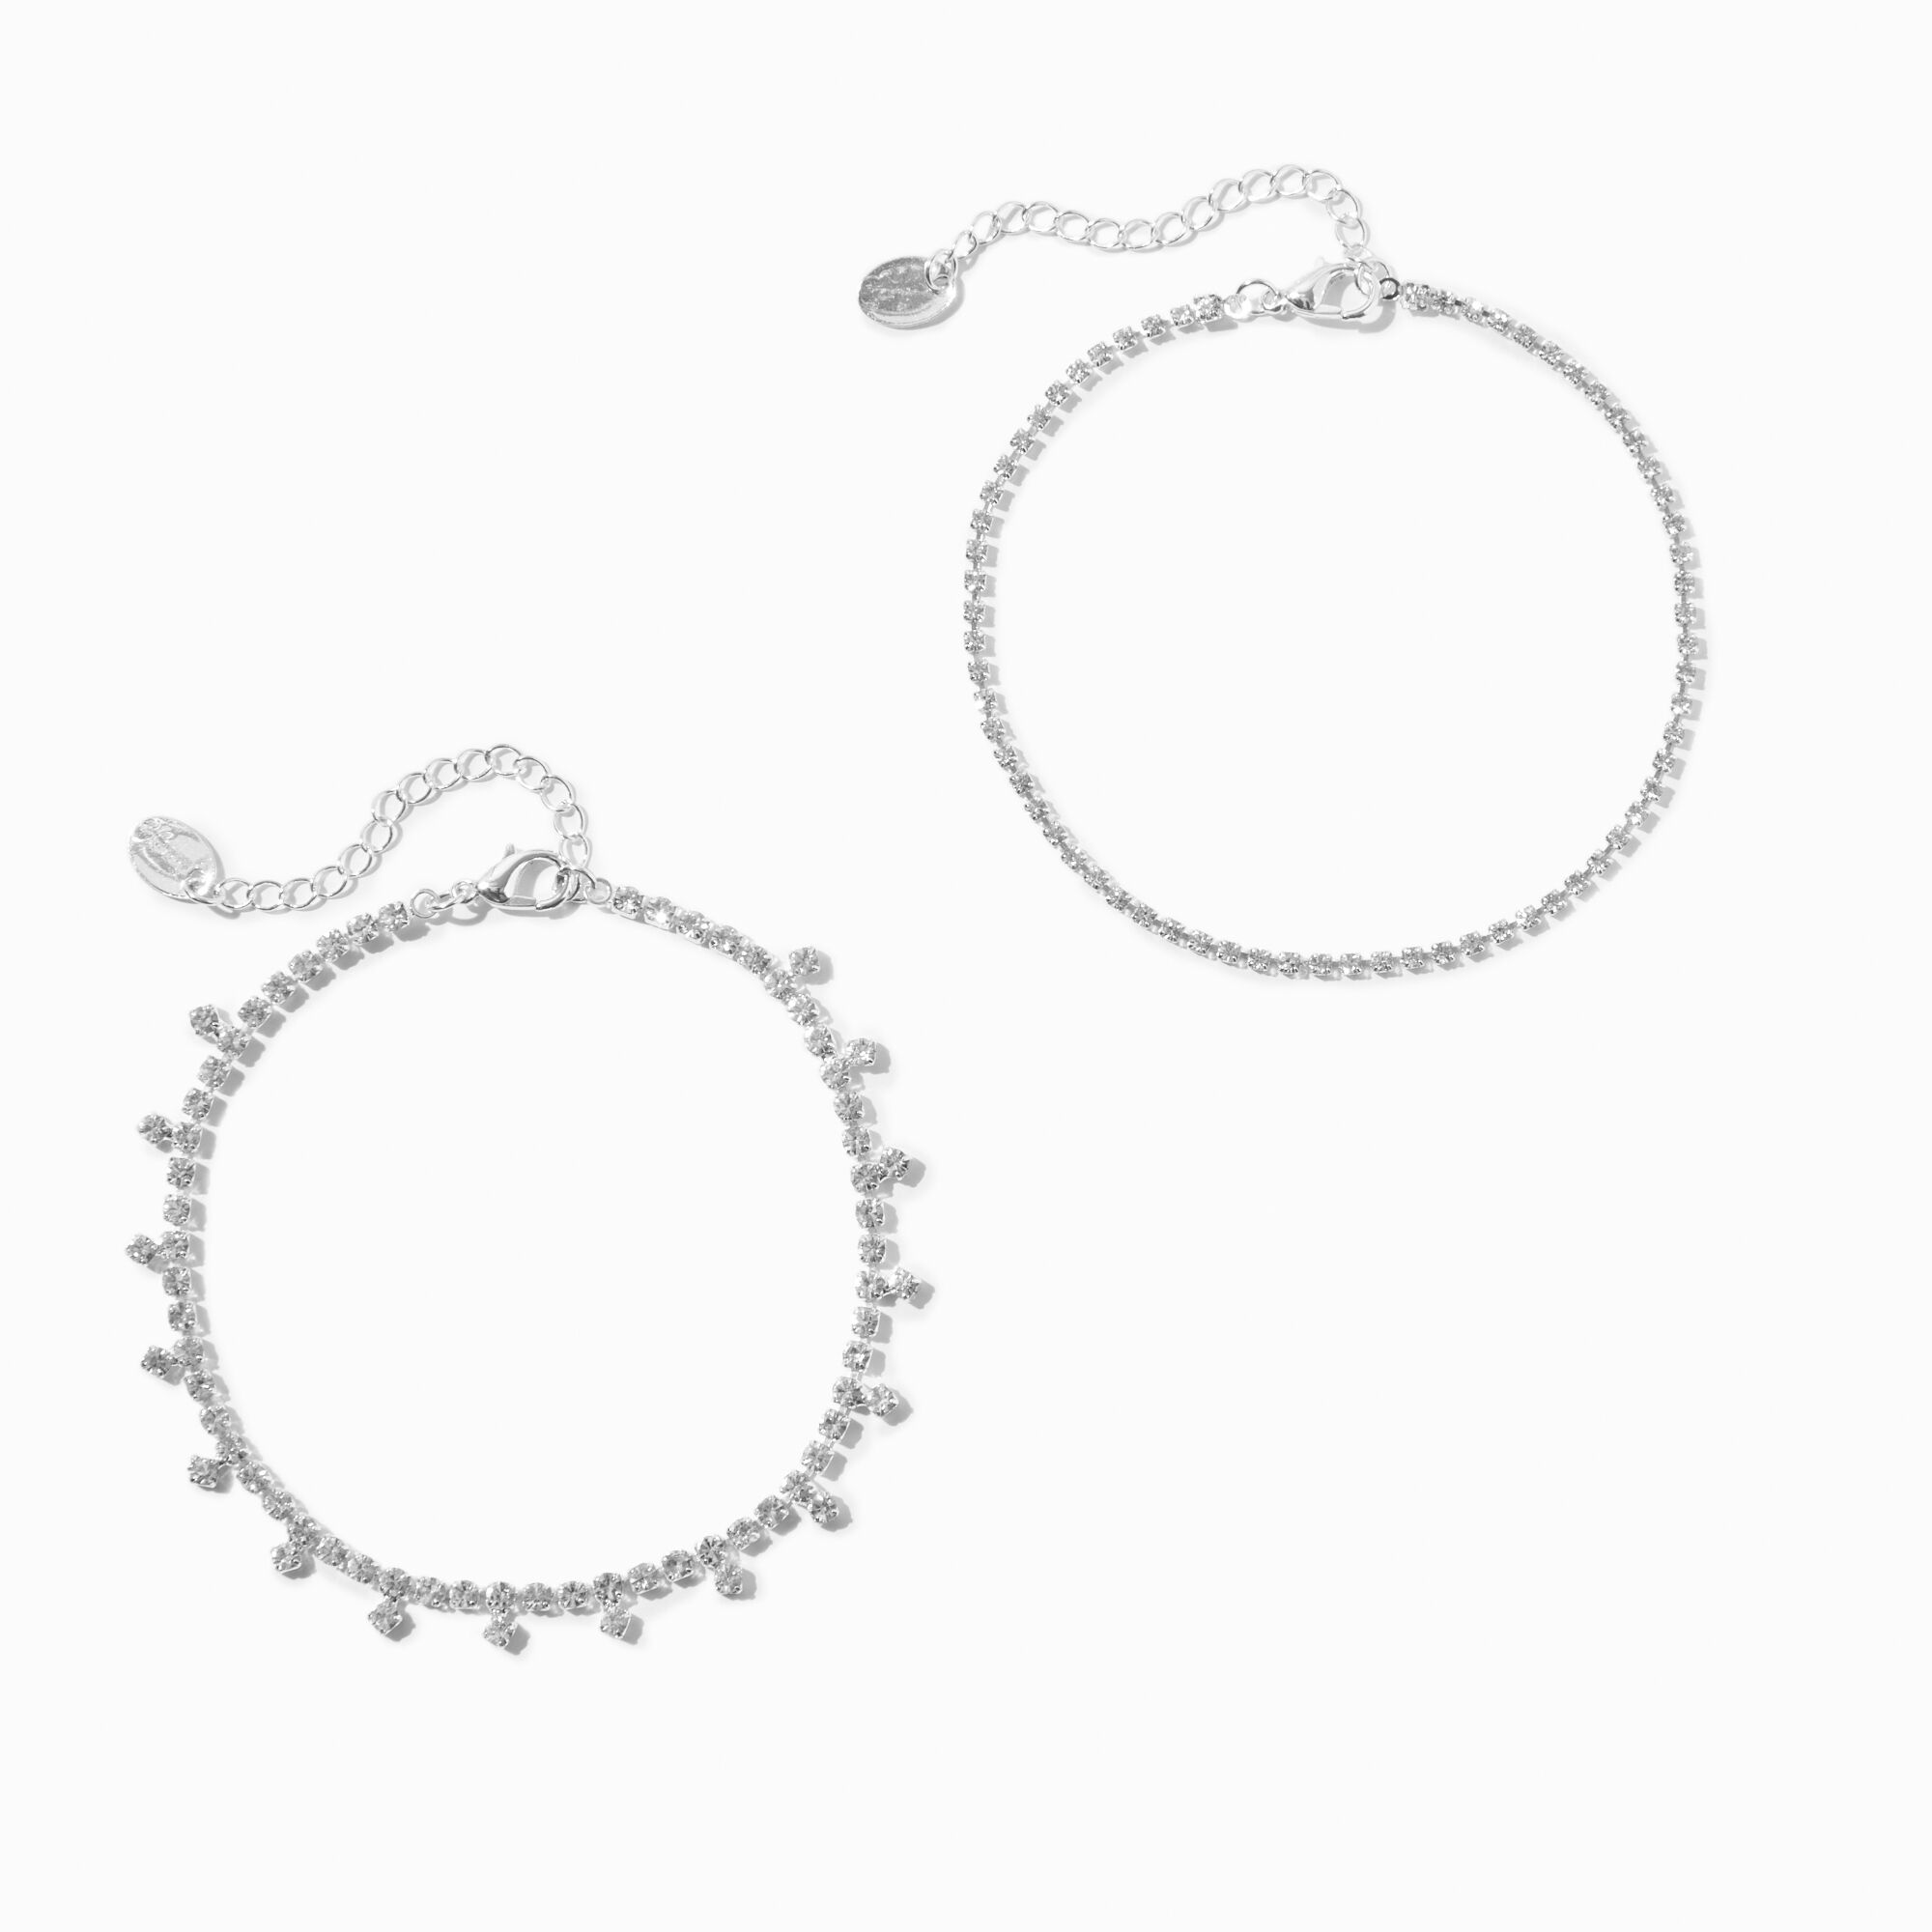 View Claires Tone Crystal Drip Cup Chain Anklets 2 Pack Silver information